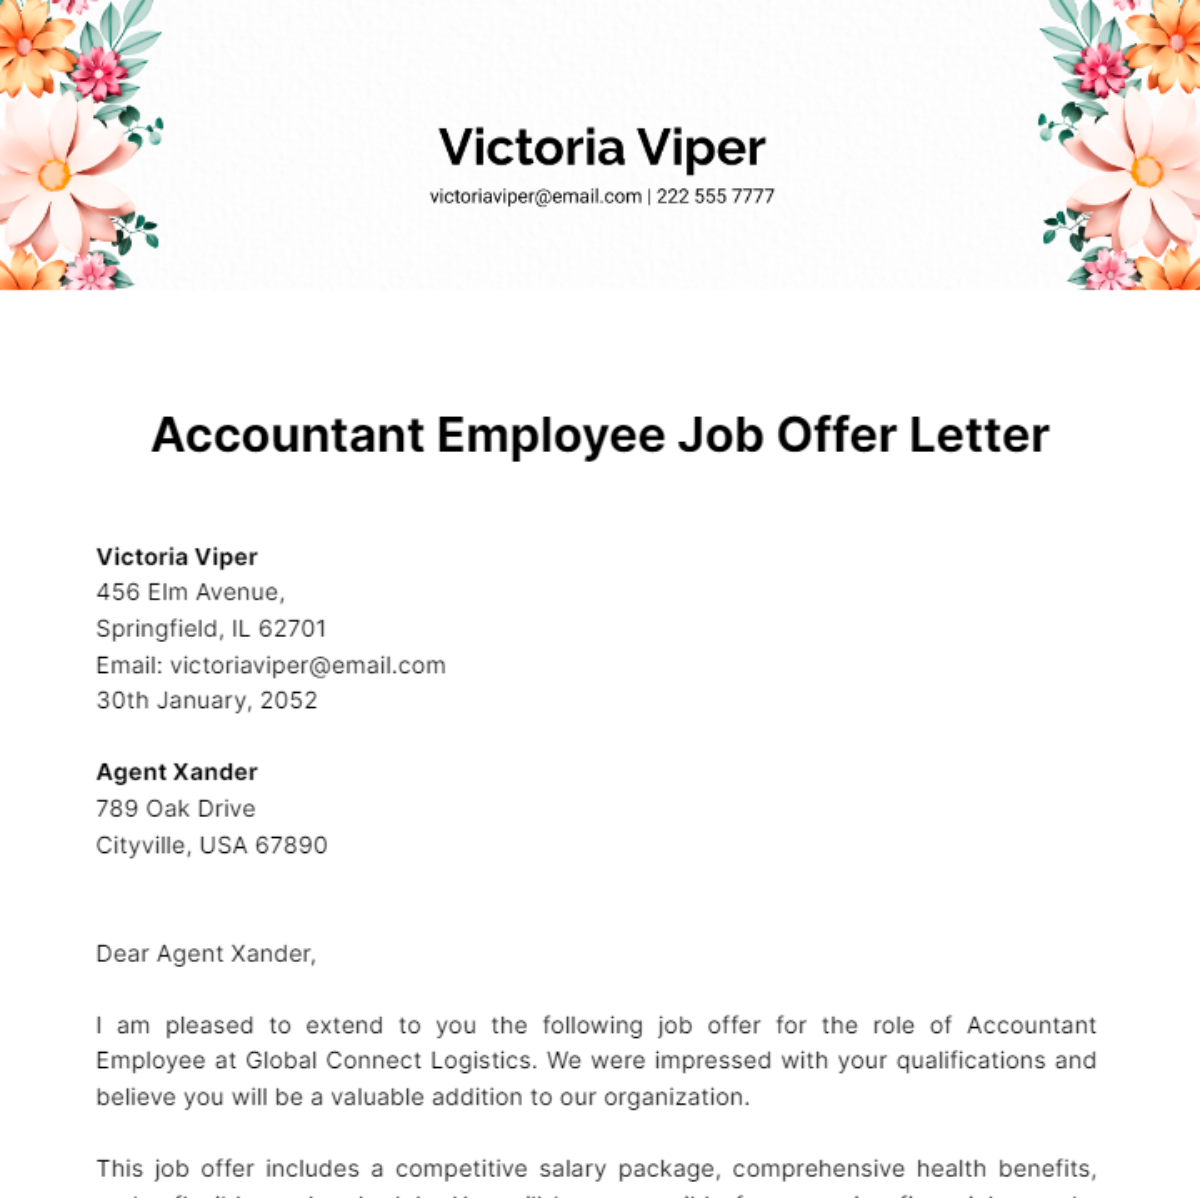 Accountant Employee Job Offer Letter Template